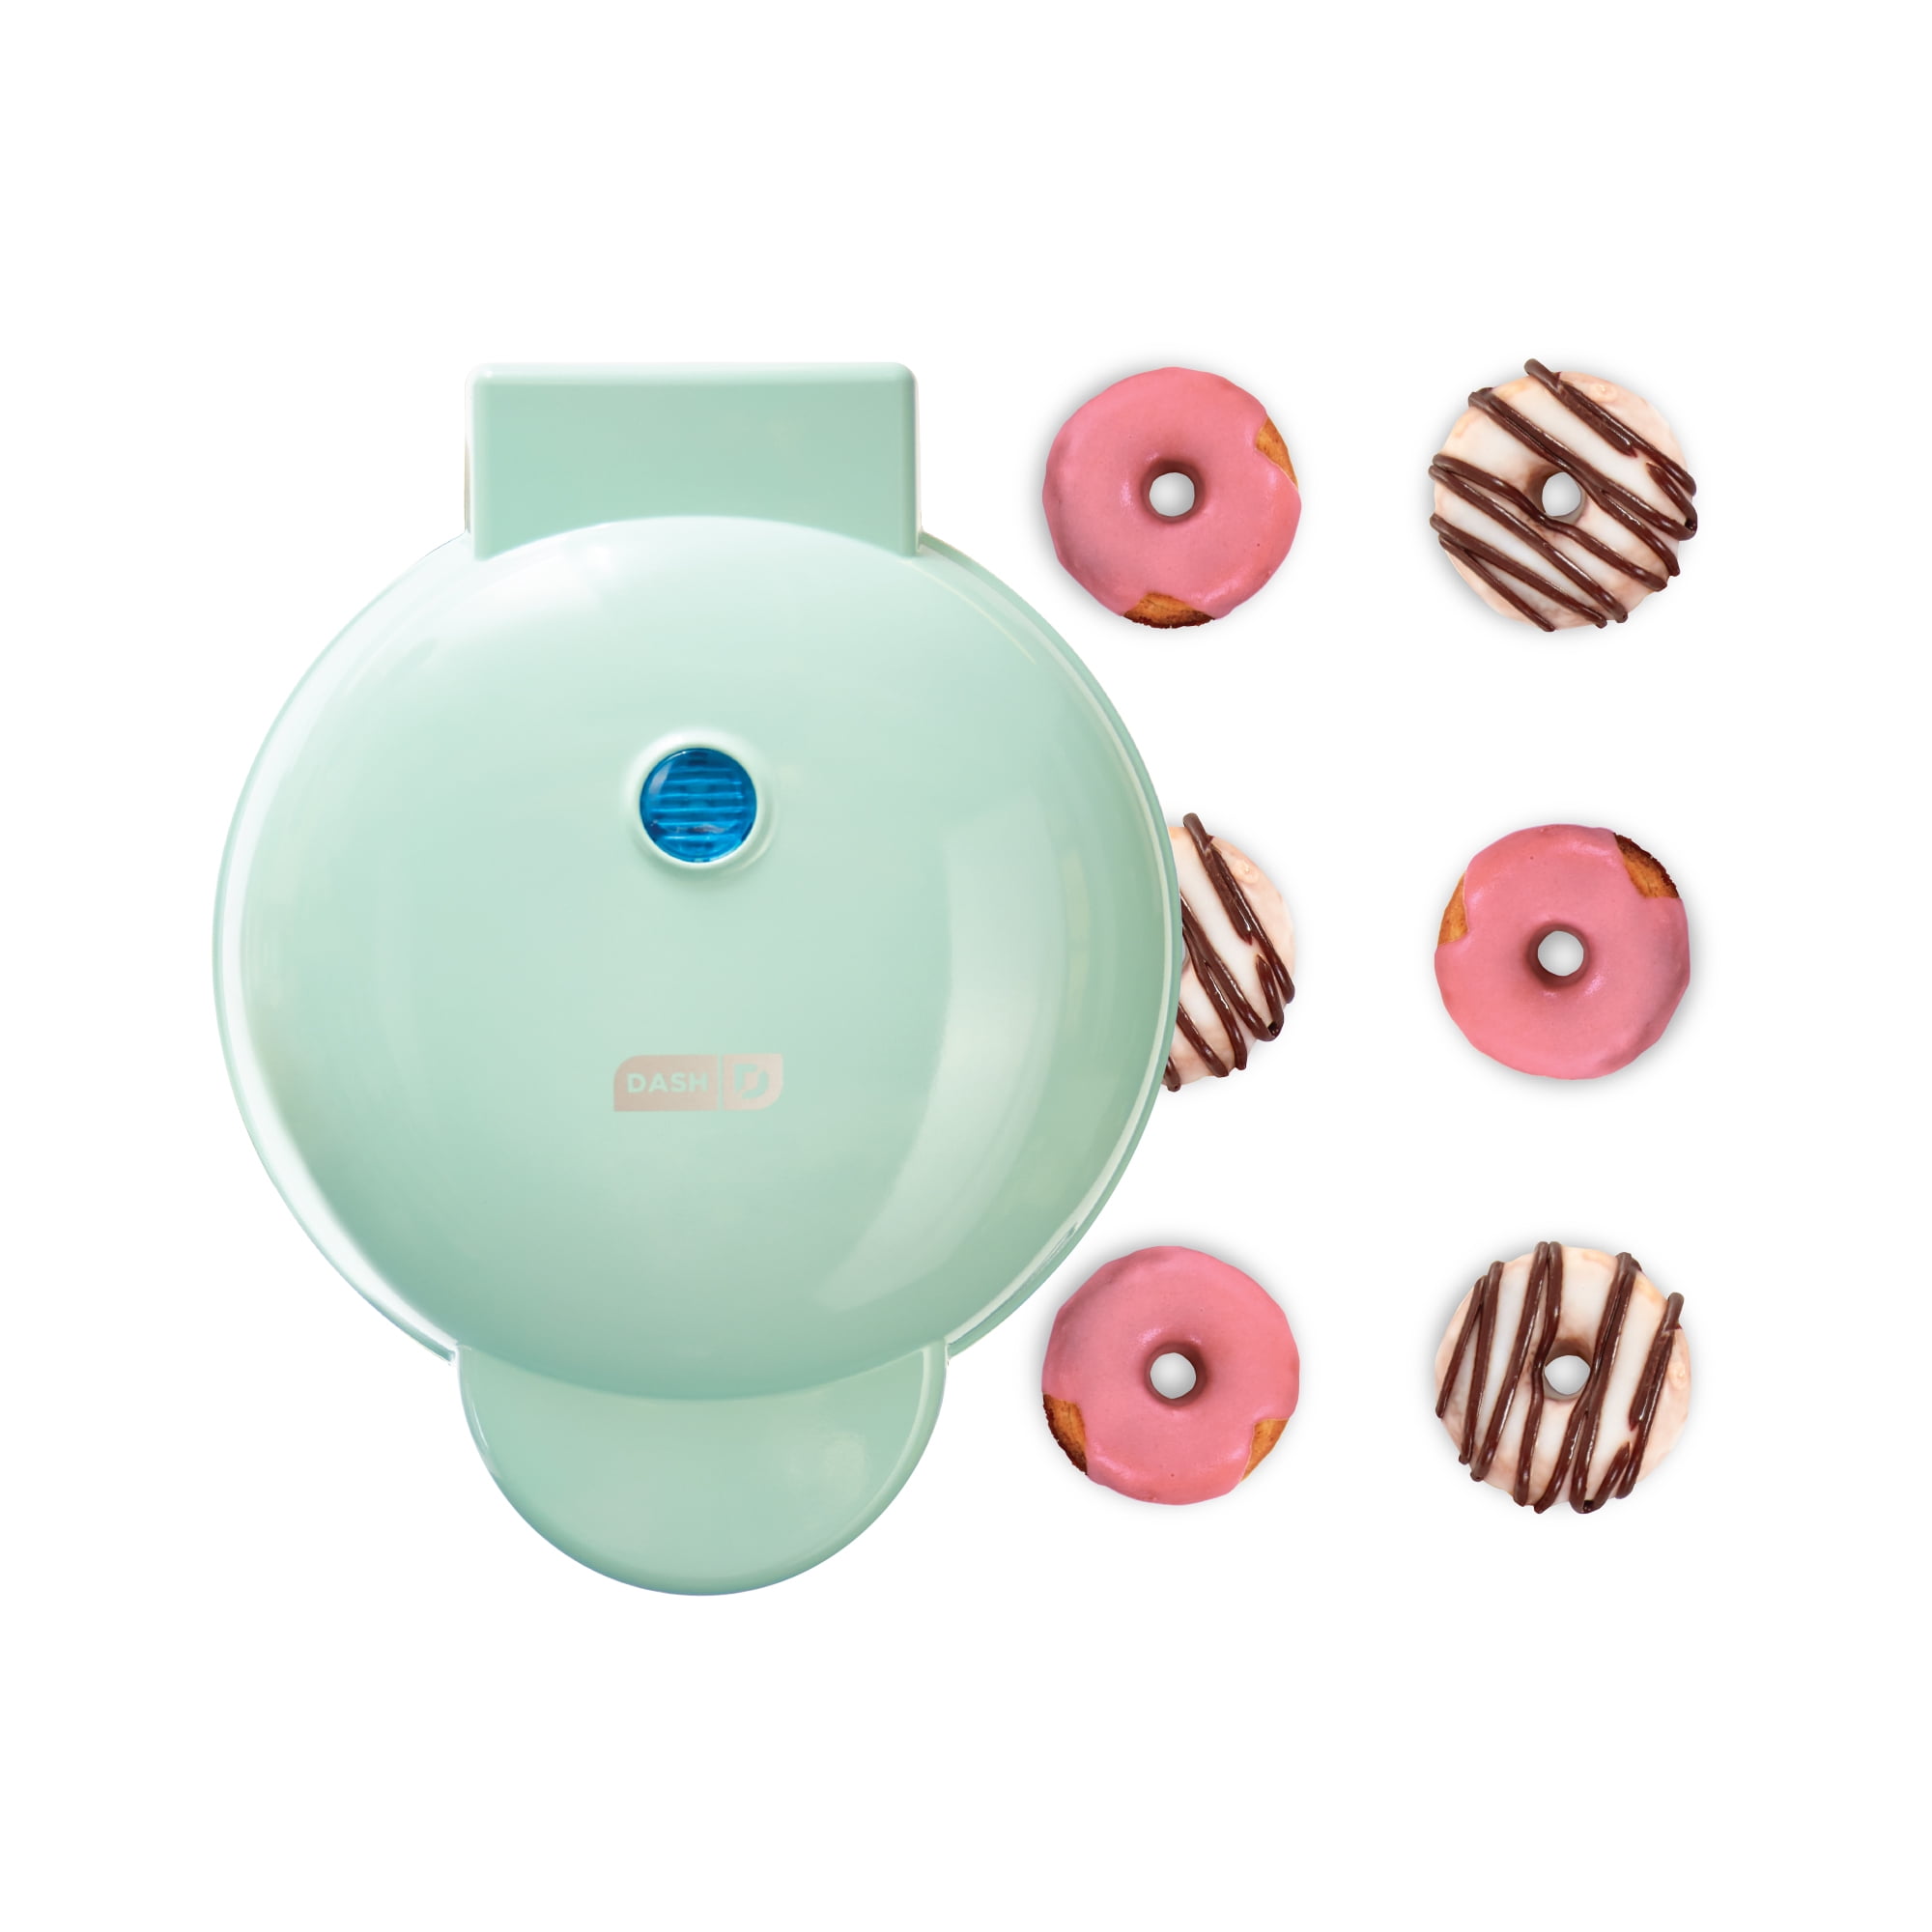 Mini 700W Donut Maker Machine For Kid-Friendly Breakfast, Snacks, Desserts  & More With Non-stick Surface, Makes 7 Doughnuts, Donut Print Pink Blue Red